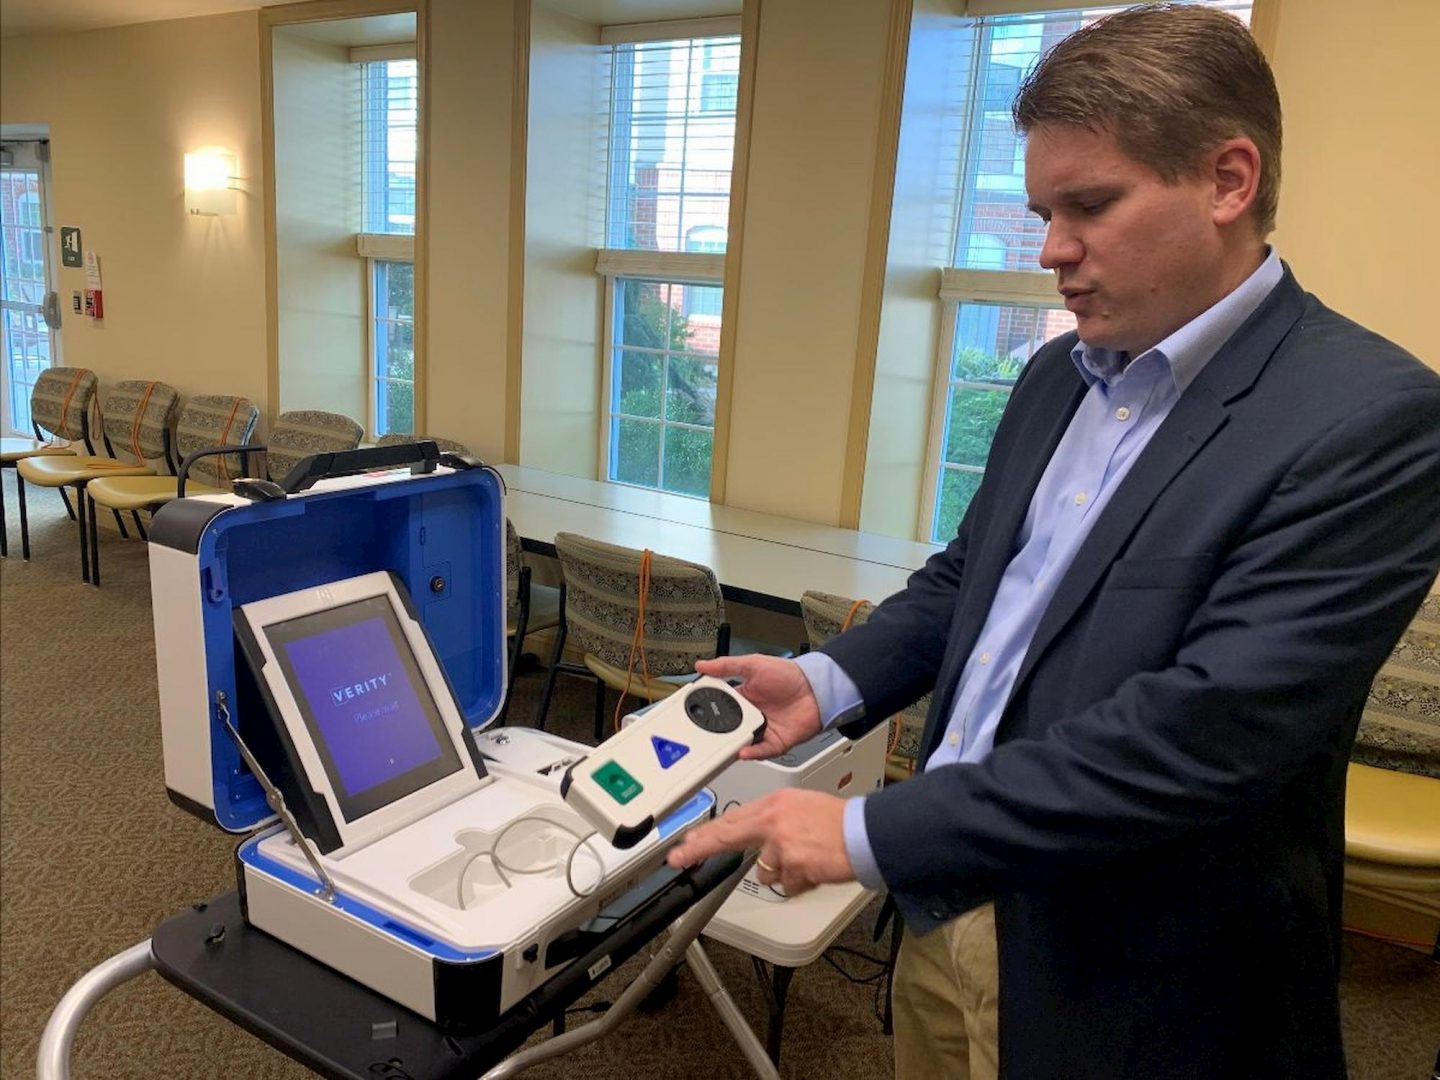 Randall Wenger, Lancaster County’s chief elections clerk, explains features of the county’s Hart InterCivic Verity Voting system at a demonstration last fall. (Emily Previti/PA Post)